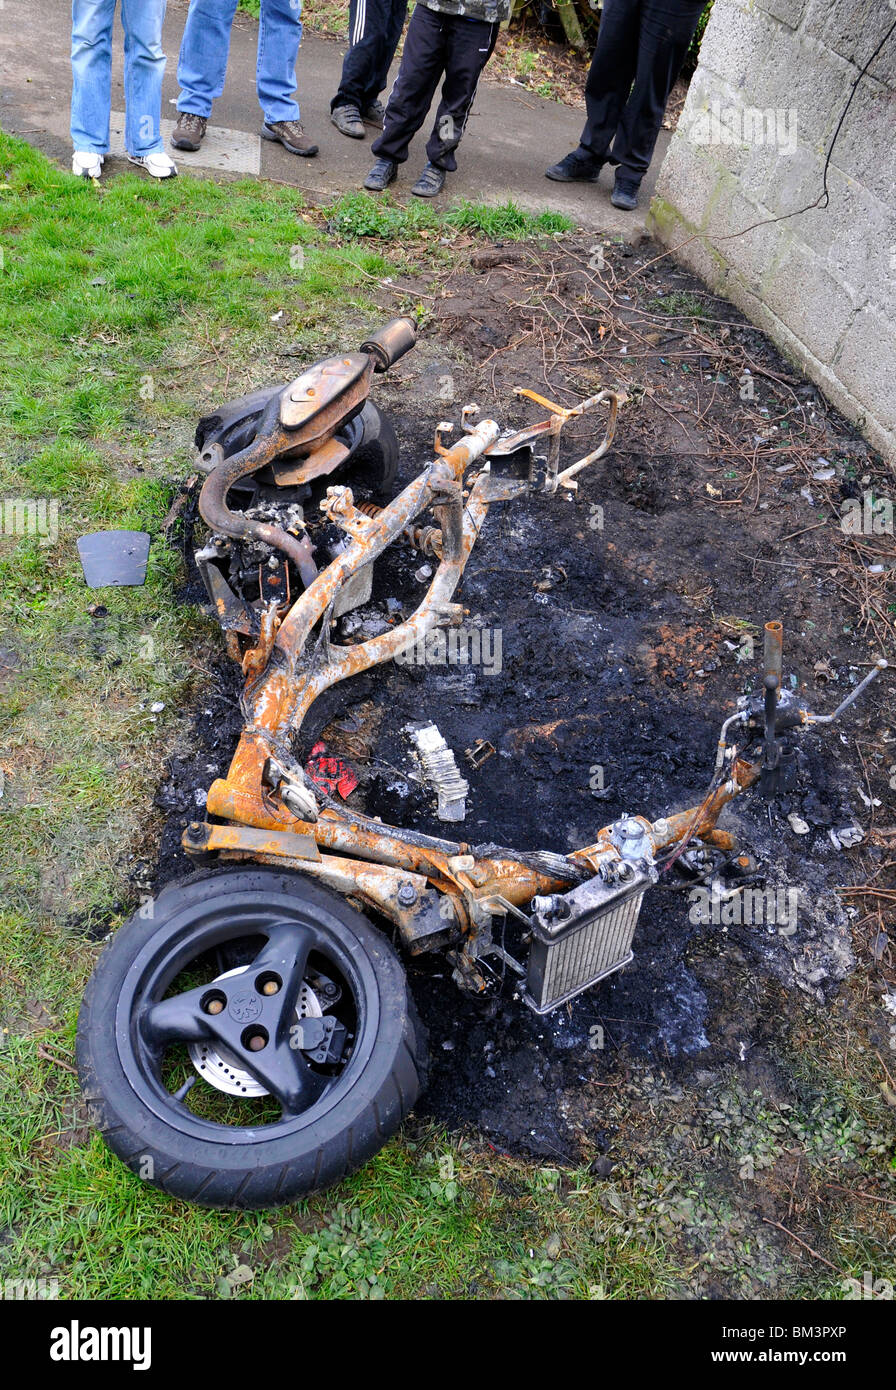 Burnt out motor scooter Stock Photo